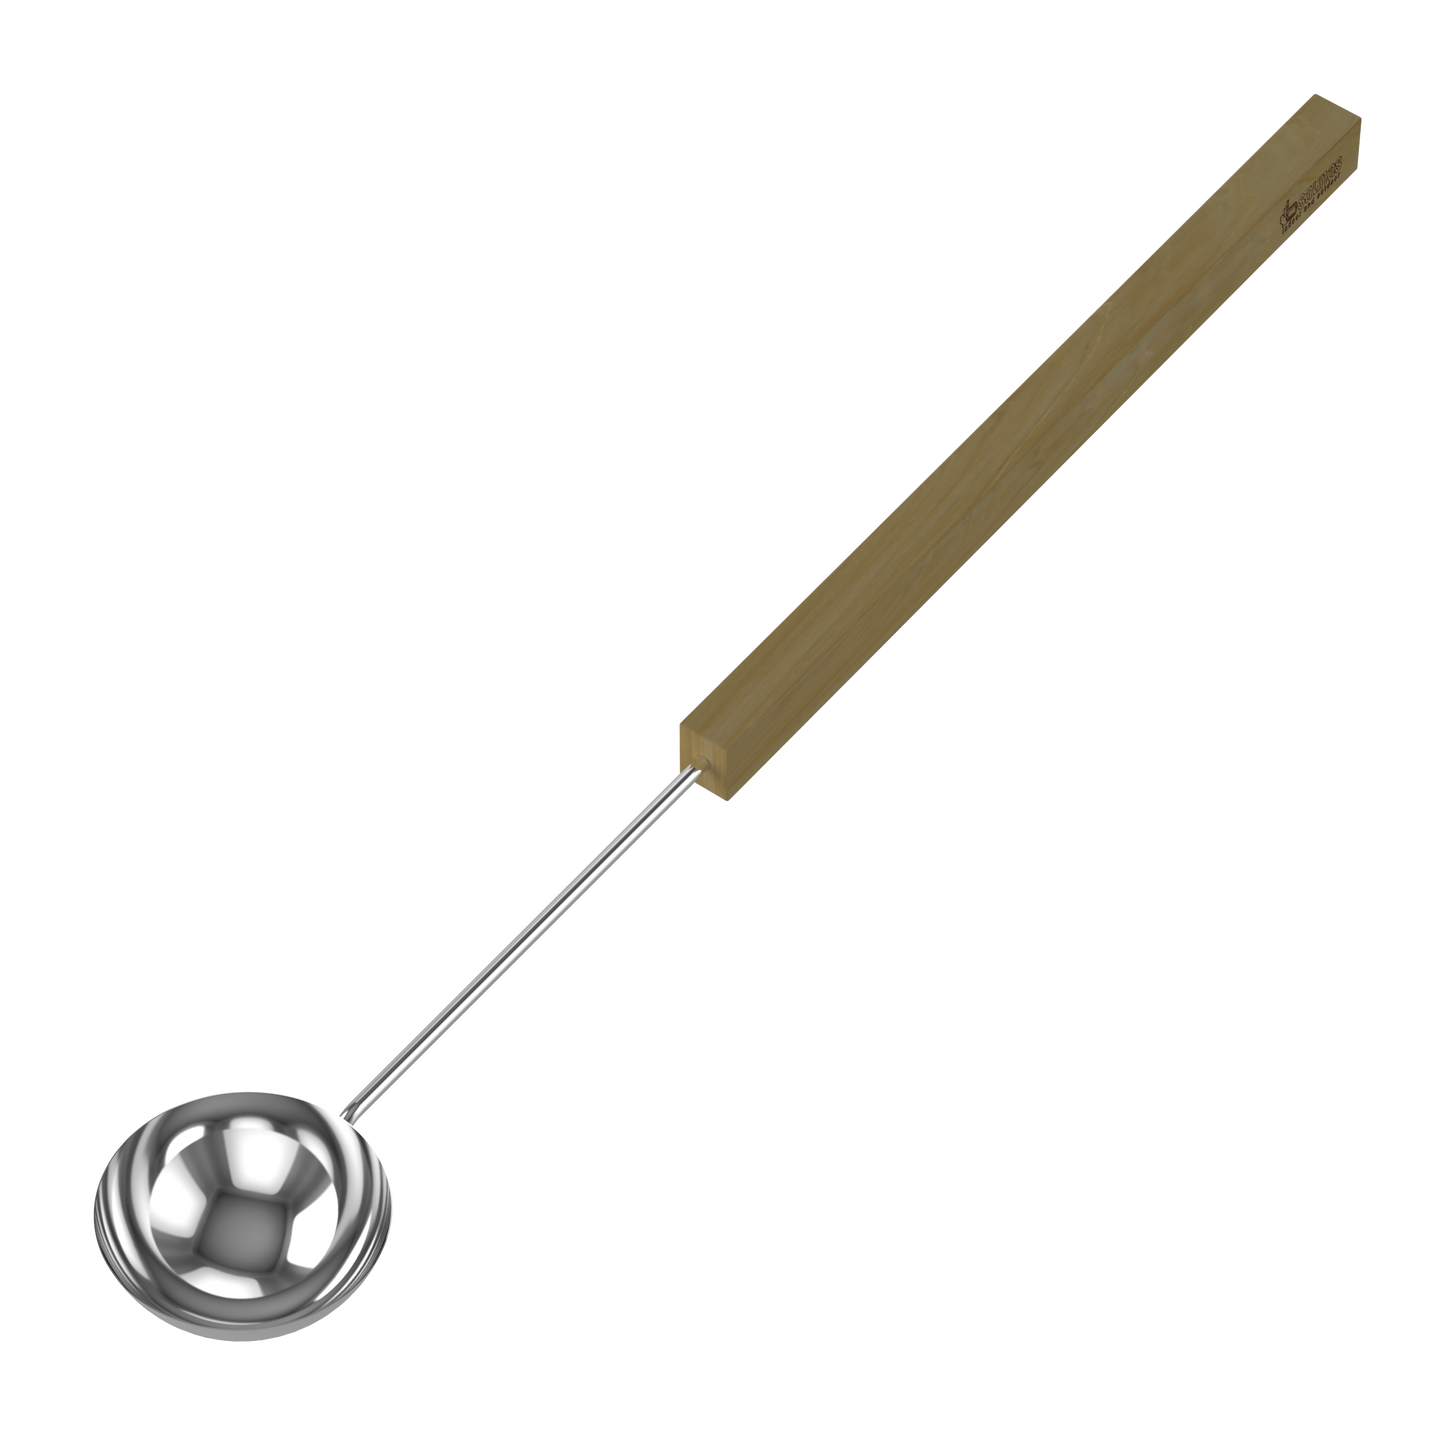 Traditional Sauna Ladle Stainless Steel w/ Wooden Handle